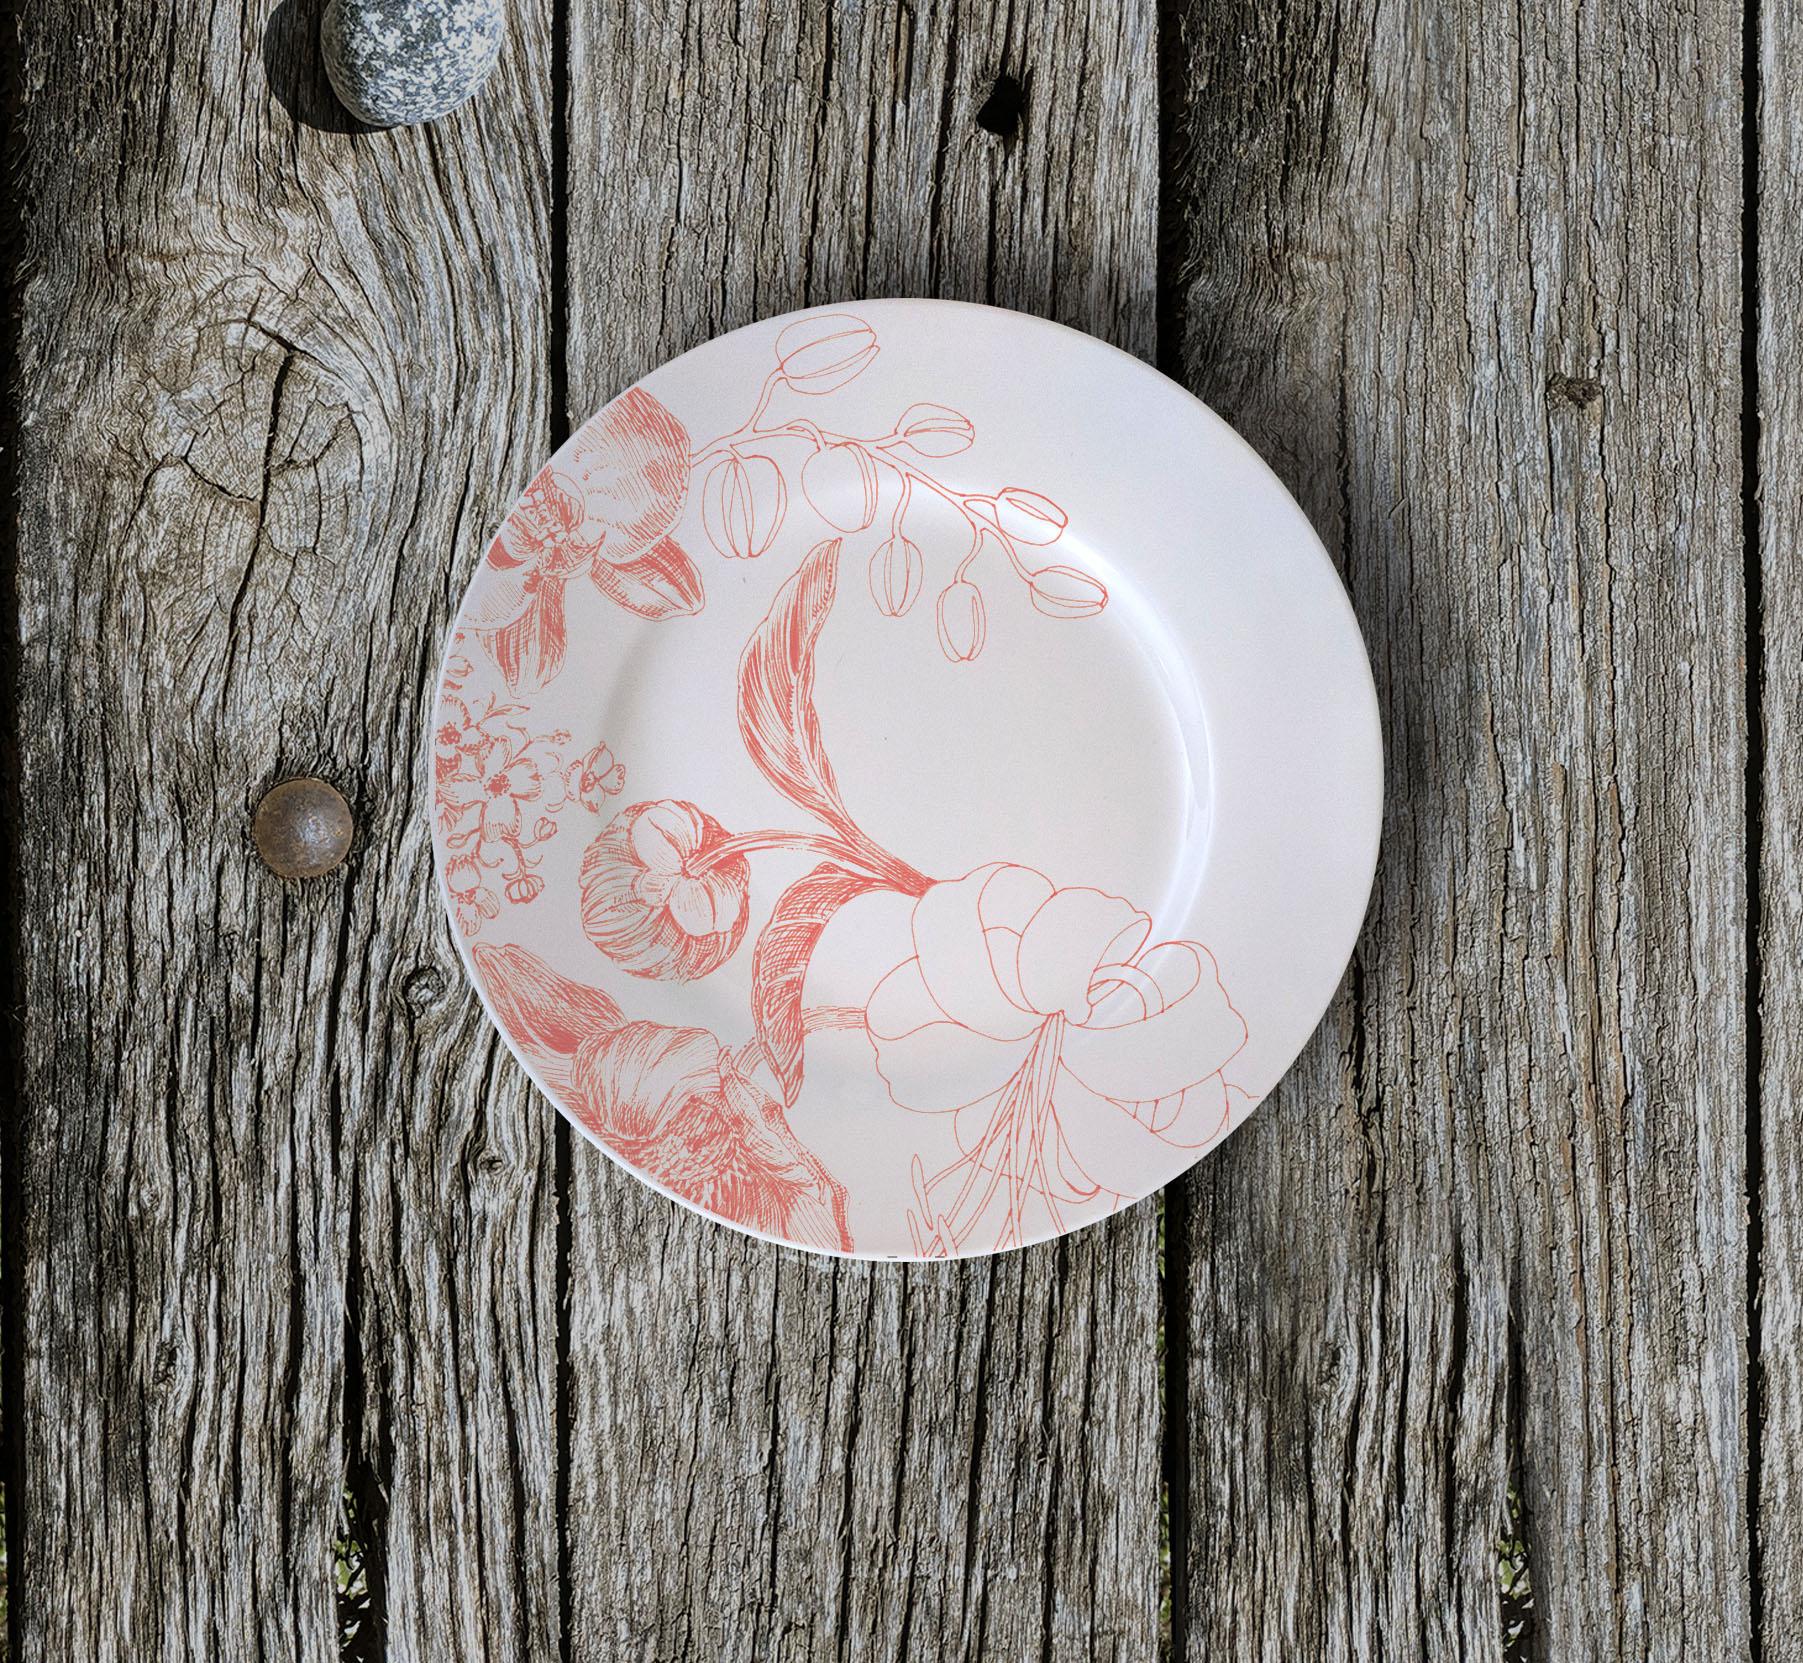 Marie Antoniette bread plates, are designed as the porcelain set of a contemporary Queen Marie Antoniette, still alive in 2020. It is an explosion of detailed flowers and blossoms, originally hand-painted with an engraving technique that is some